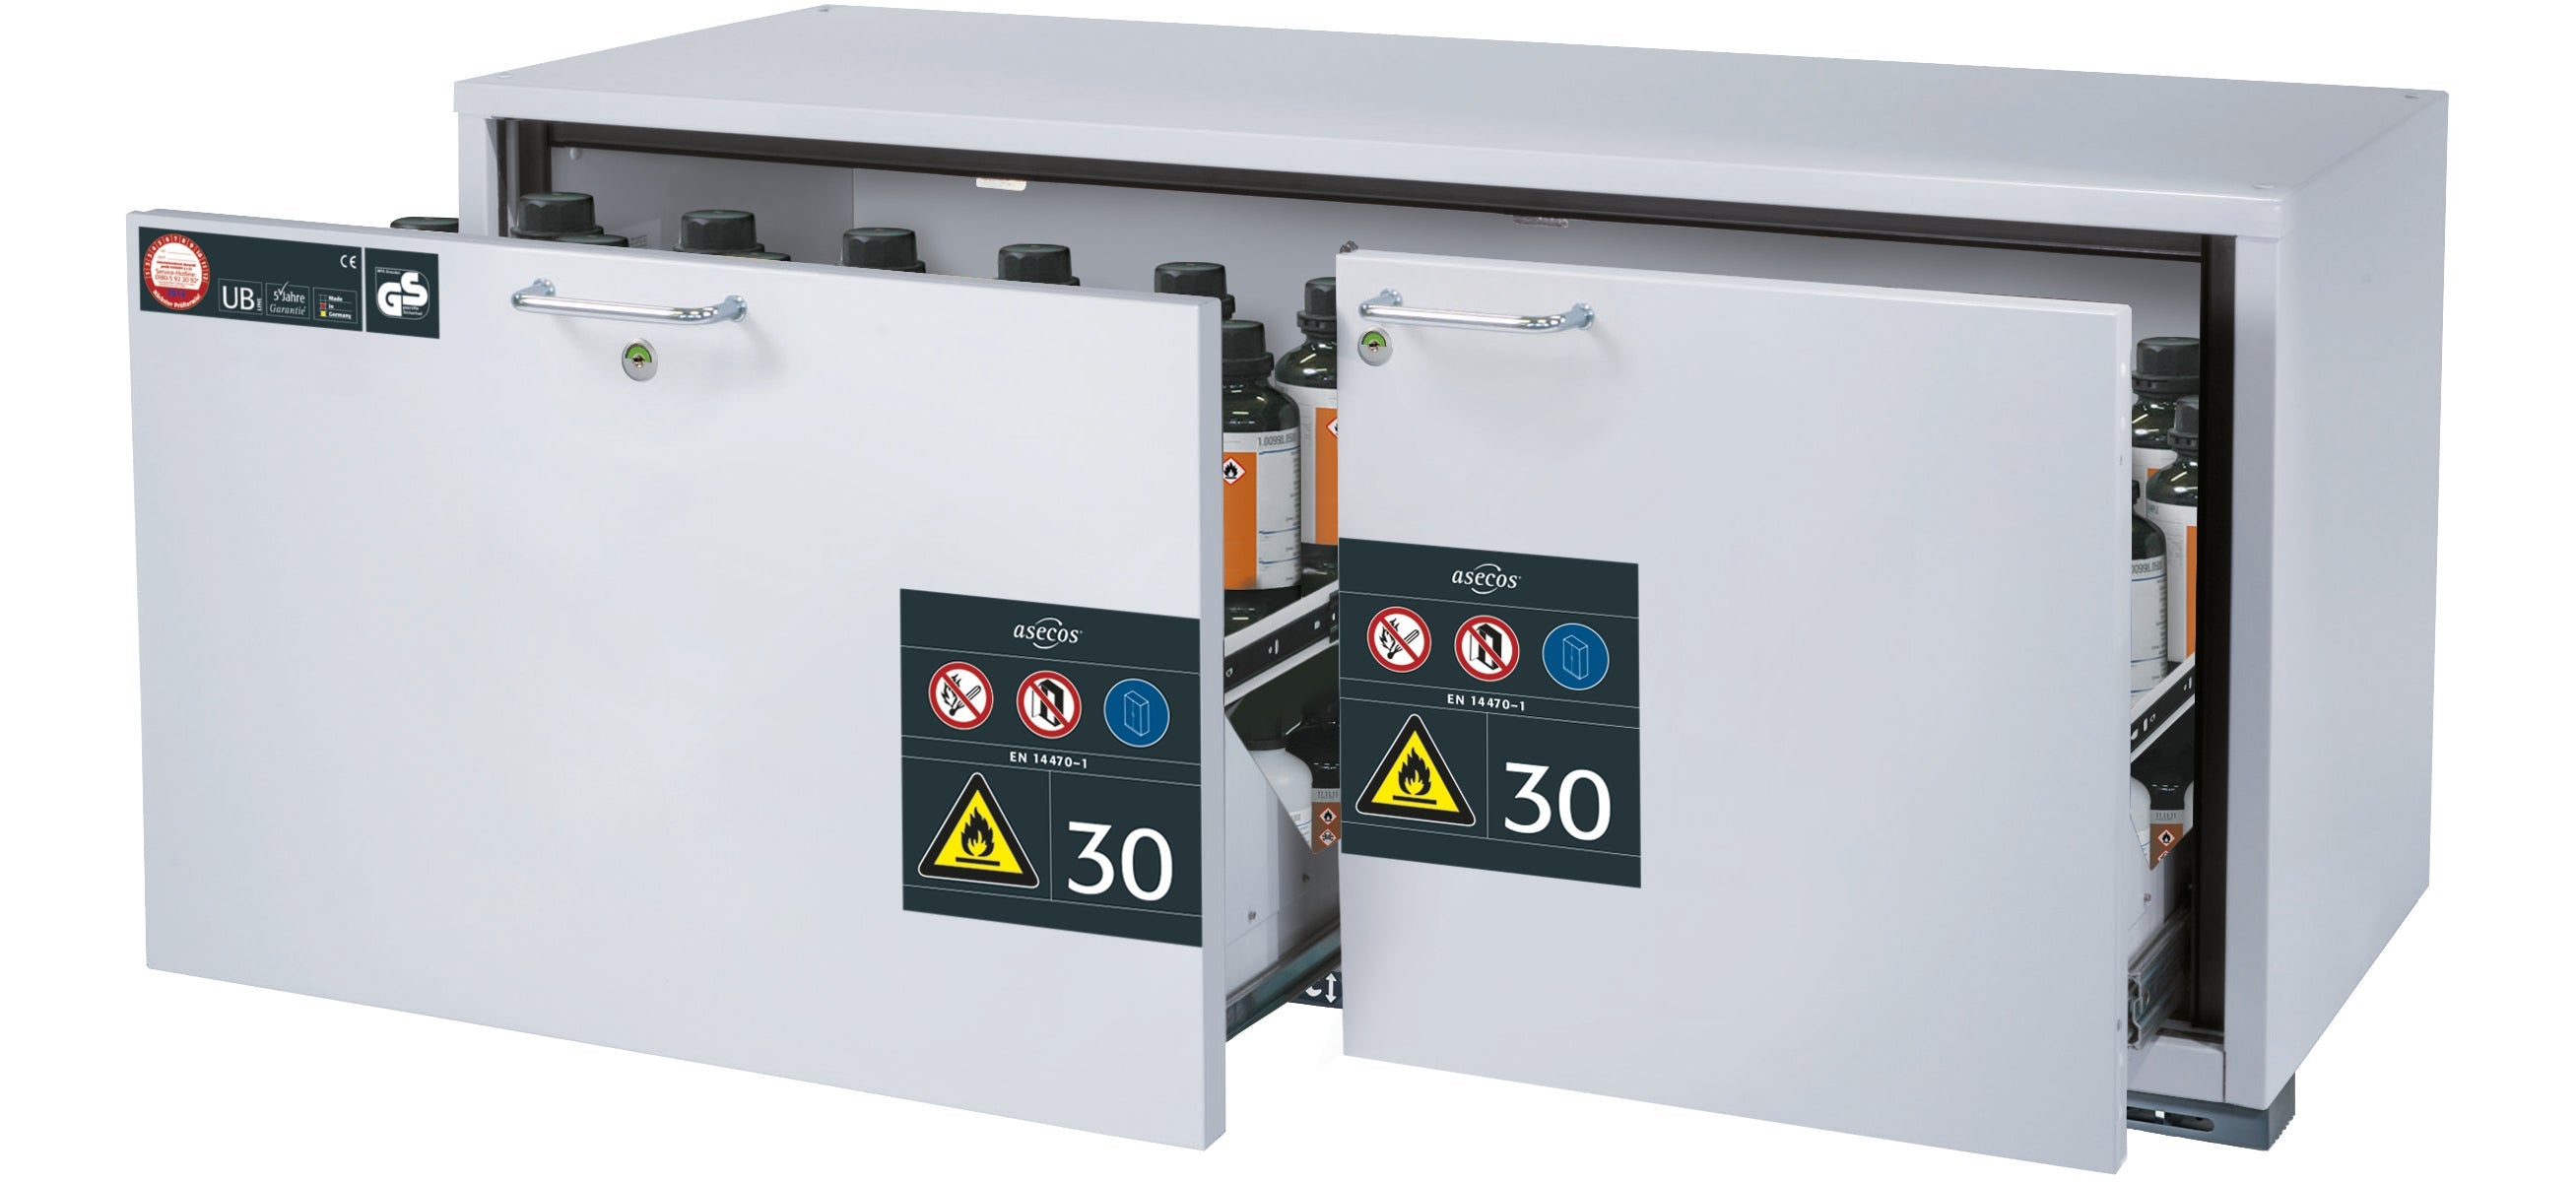 Type 30 safety base cabinet UB-S-30 model UB30.060.140.2S in light gray RAL 7035 with 2x drawer tray STAWA-R (sheet steel)